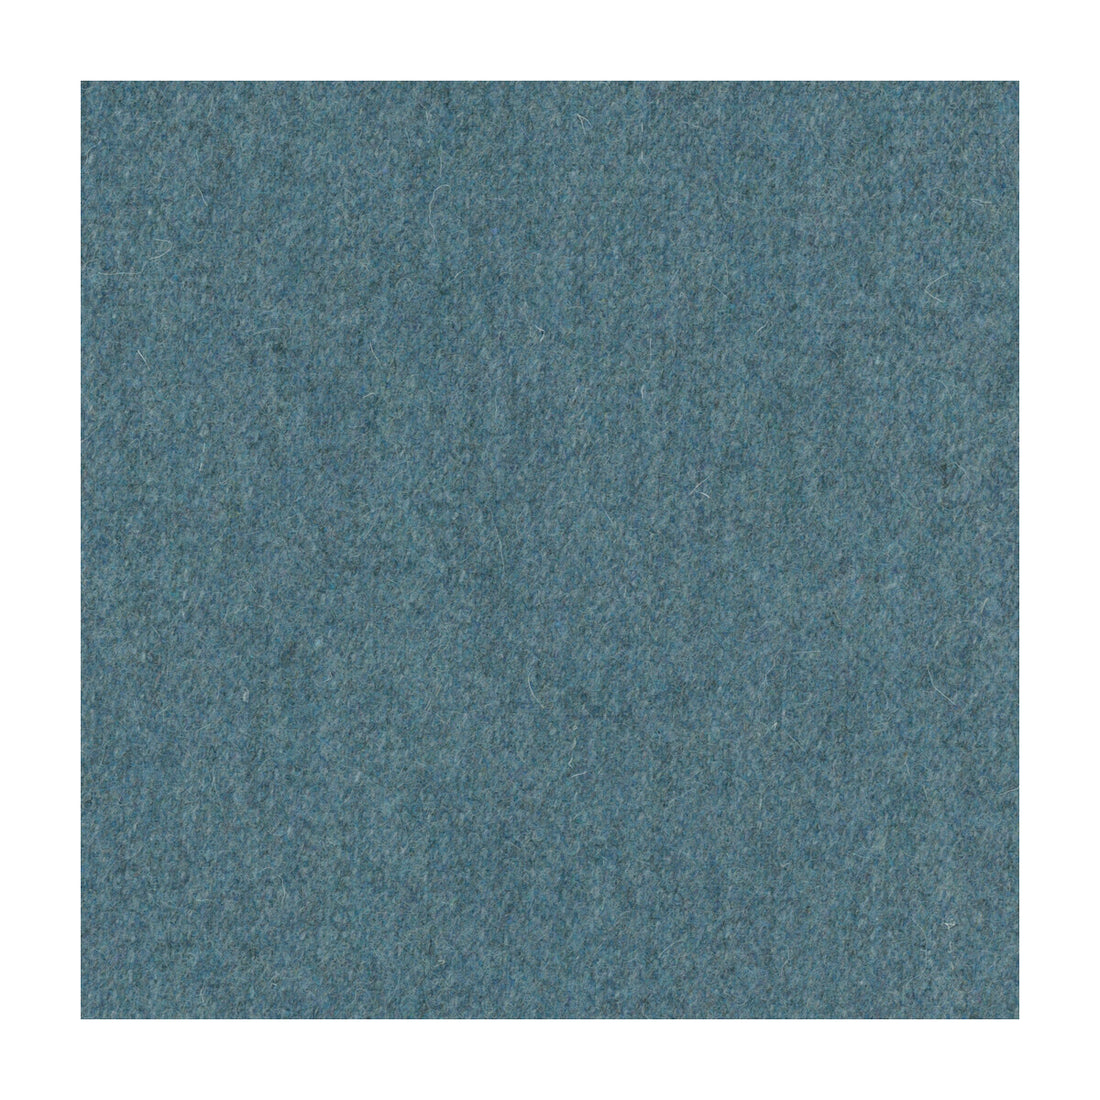 Jefferson Wool fabric in calypso color - pattern 34397.313.0 - by Kravet Contract